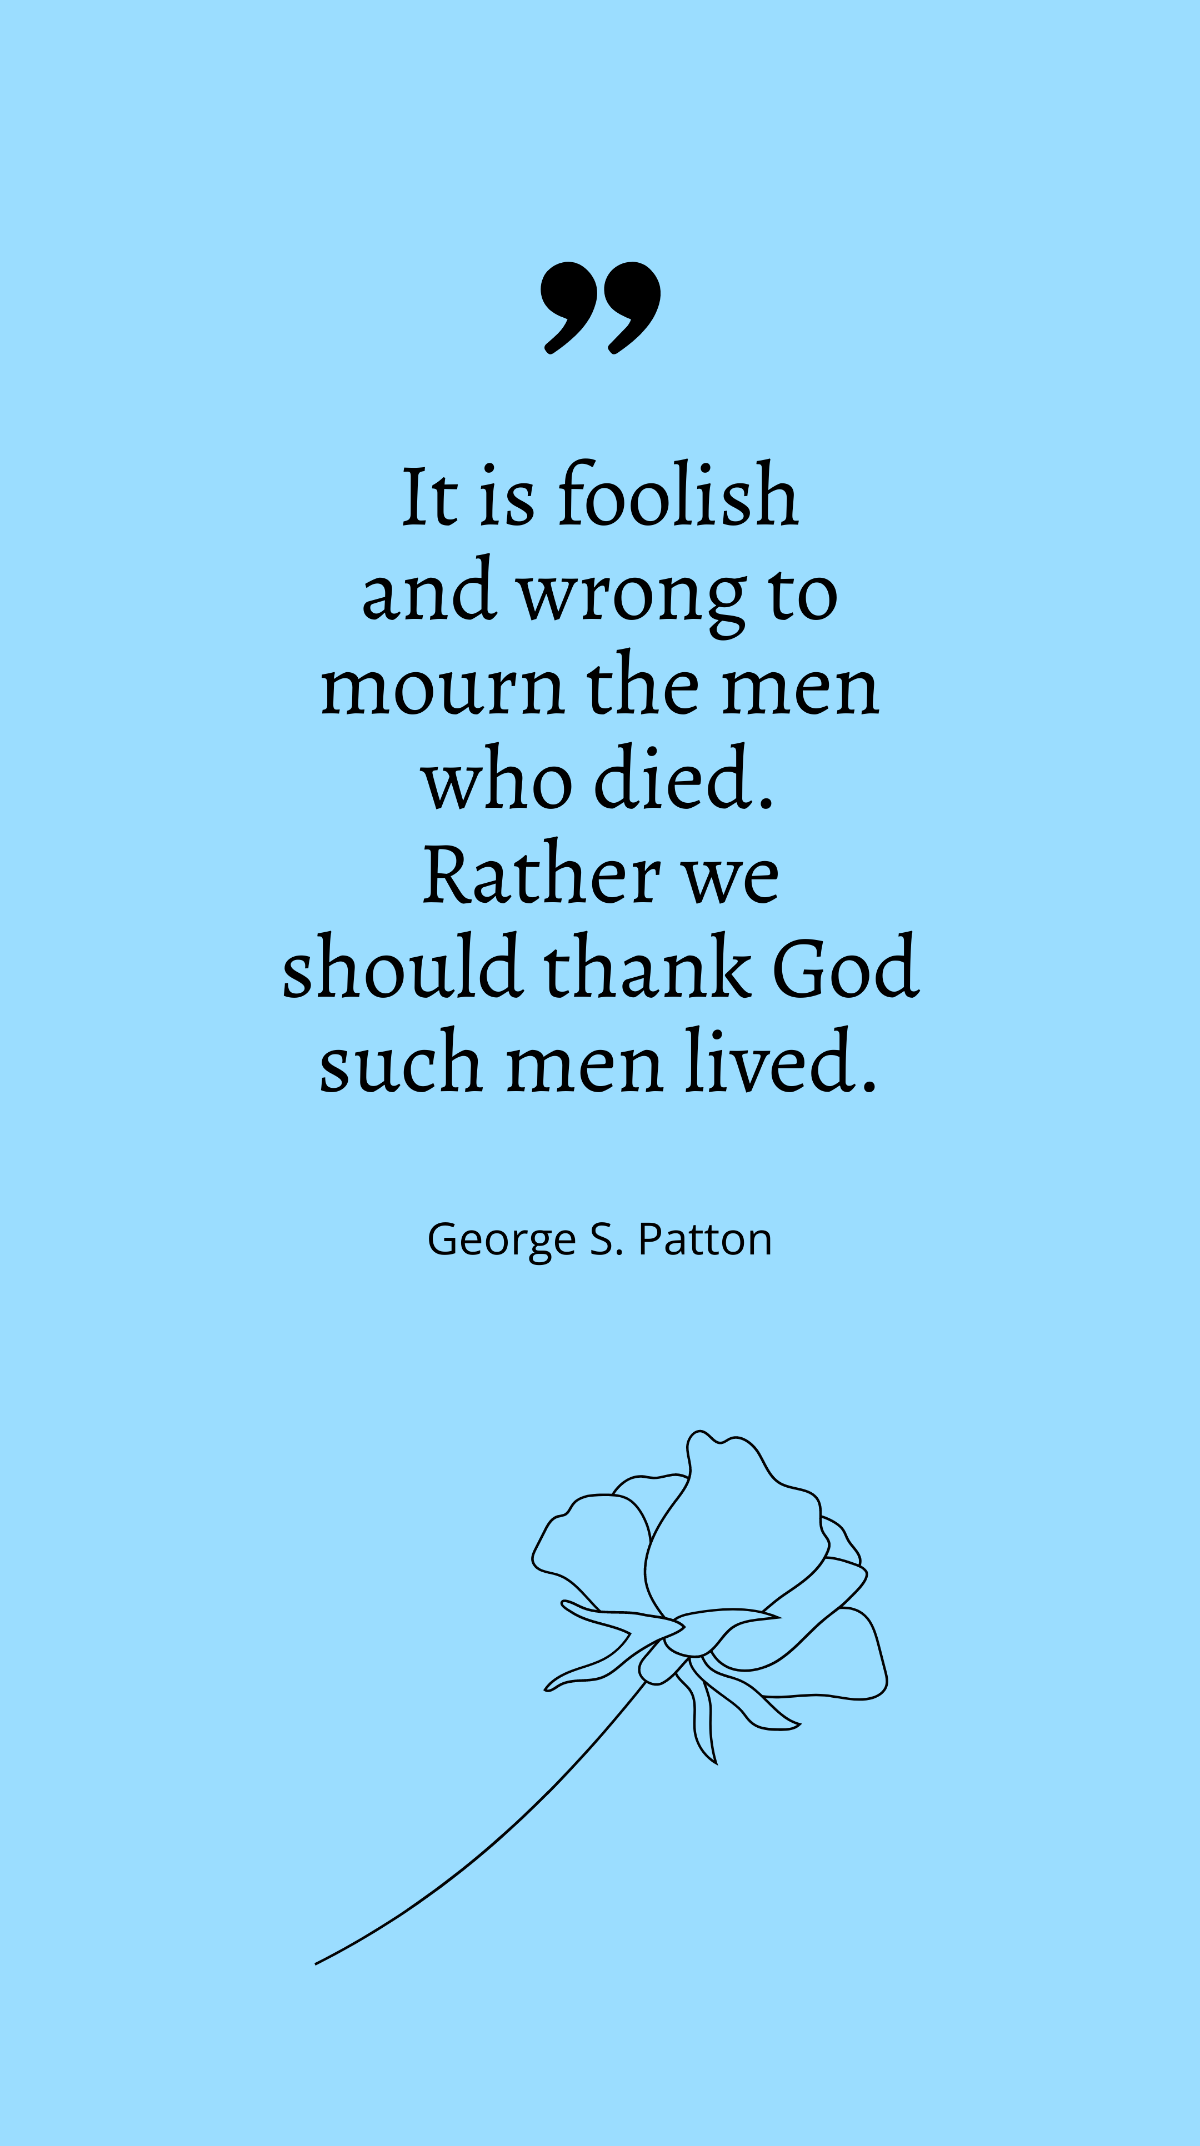 George S. Patton - "It is foolish and wrong to mourn the men who died. Rather we should thank God such men lived.”